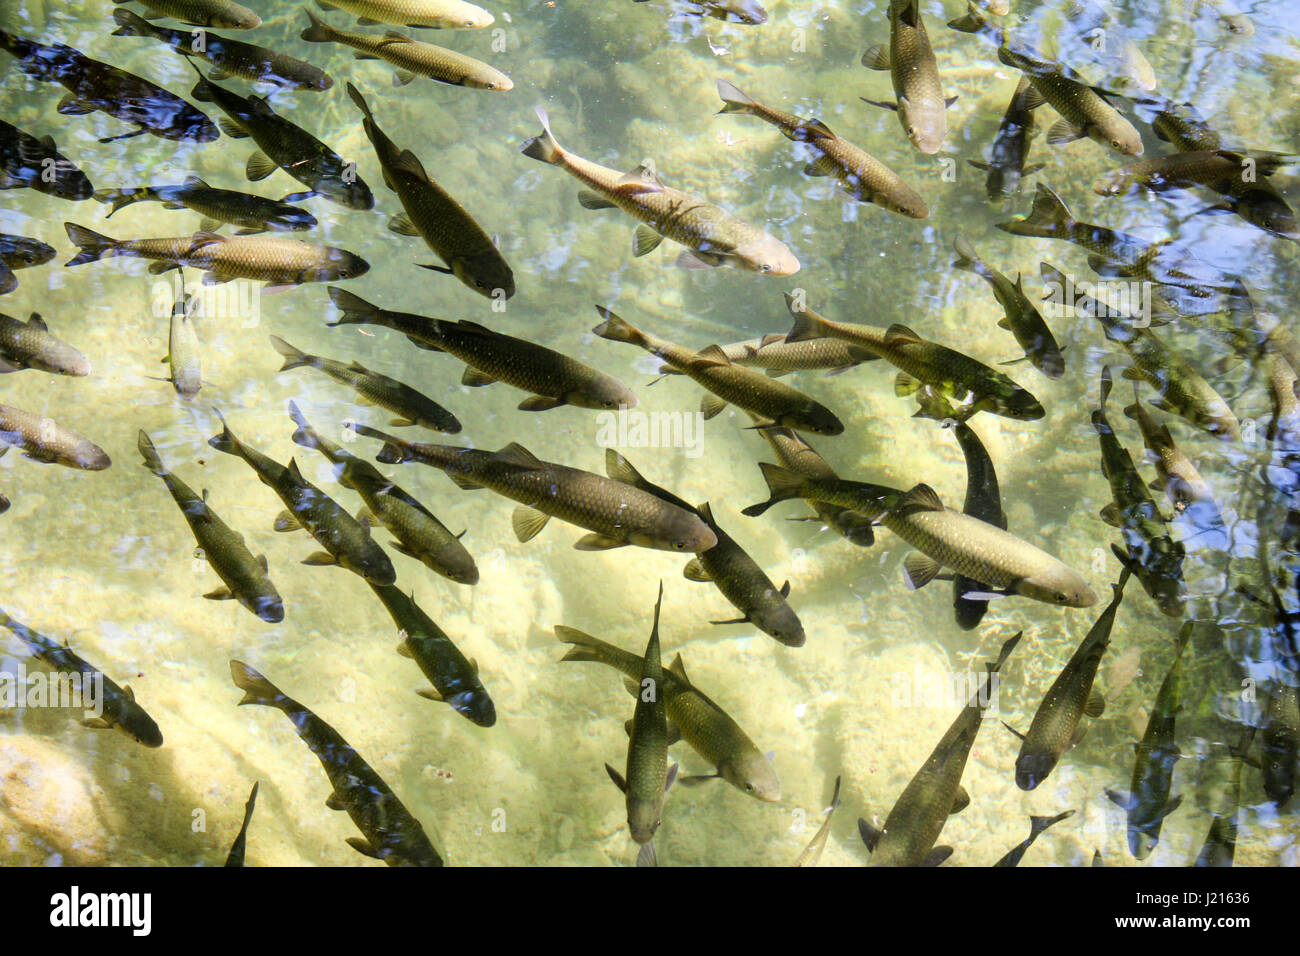 School of small fish swimming near the surface of the water Stock Photo